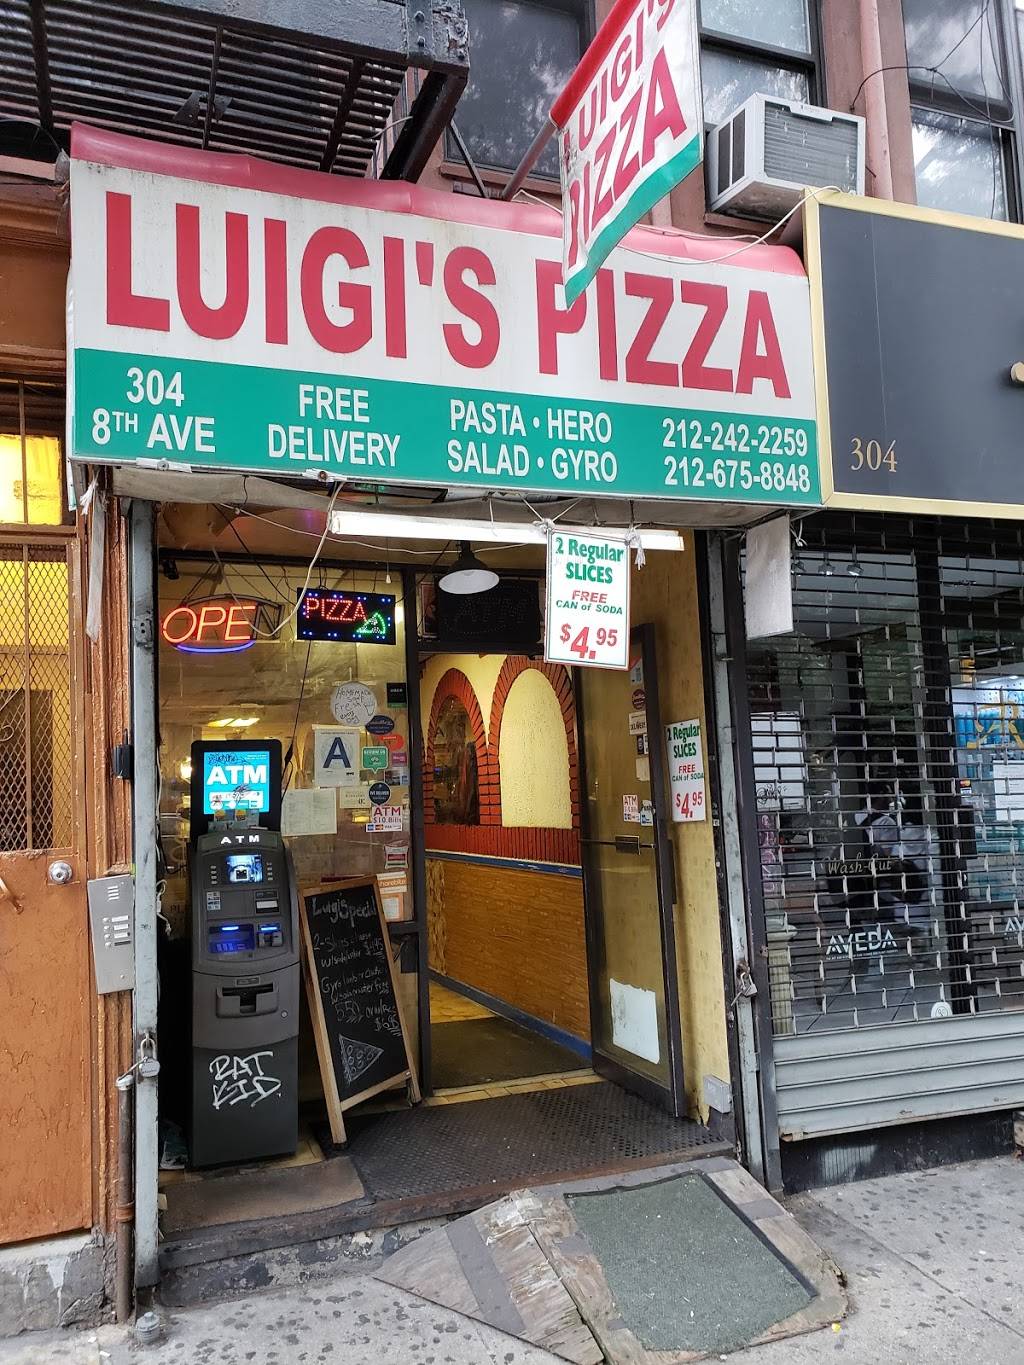 Luigis Pizza | meal delivery | 4869, 304, 8th Ave, New York, NY 10001, USA | 2122422259 OR +1 212-242-2259